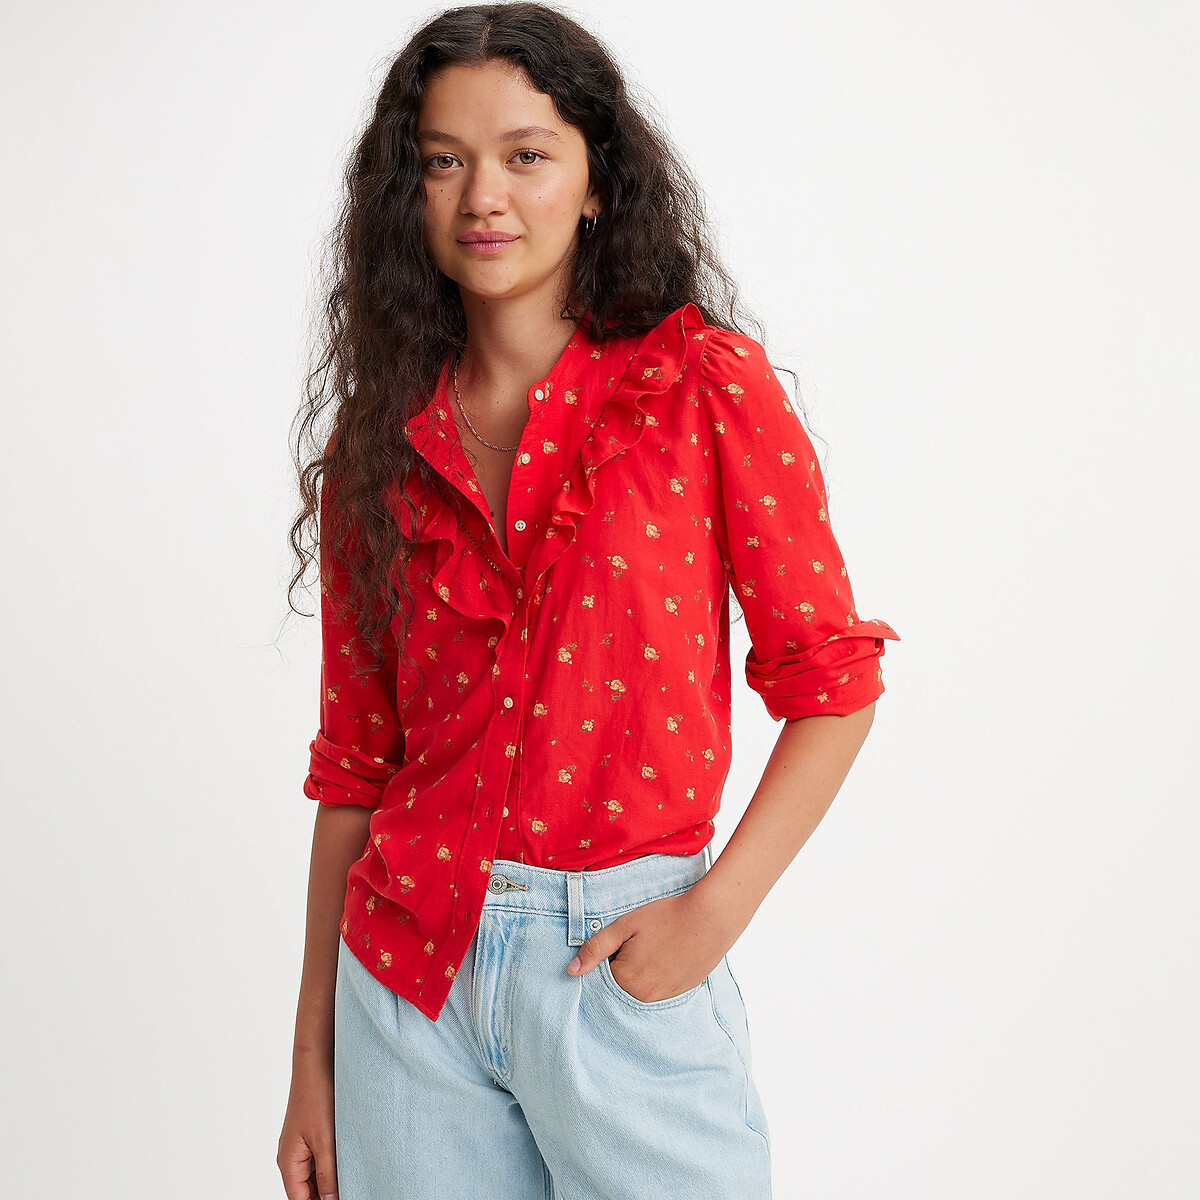 Image of Carina Floral Print Blouse in Linen Mix